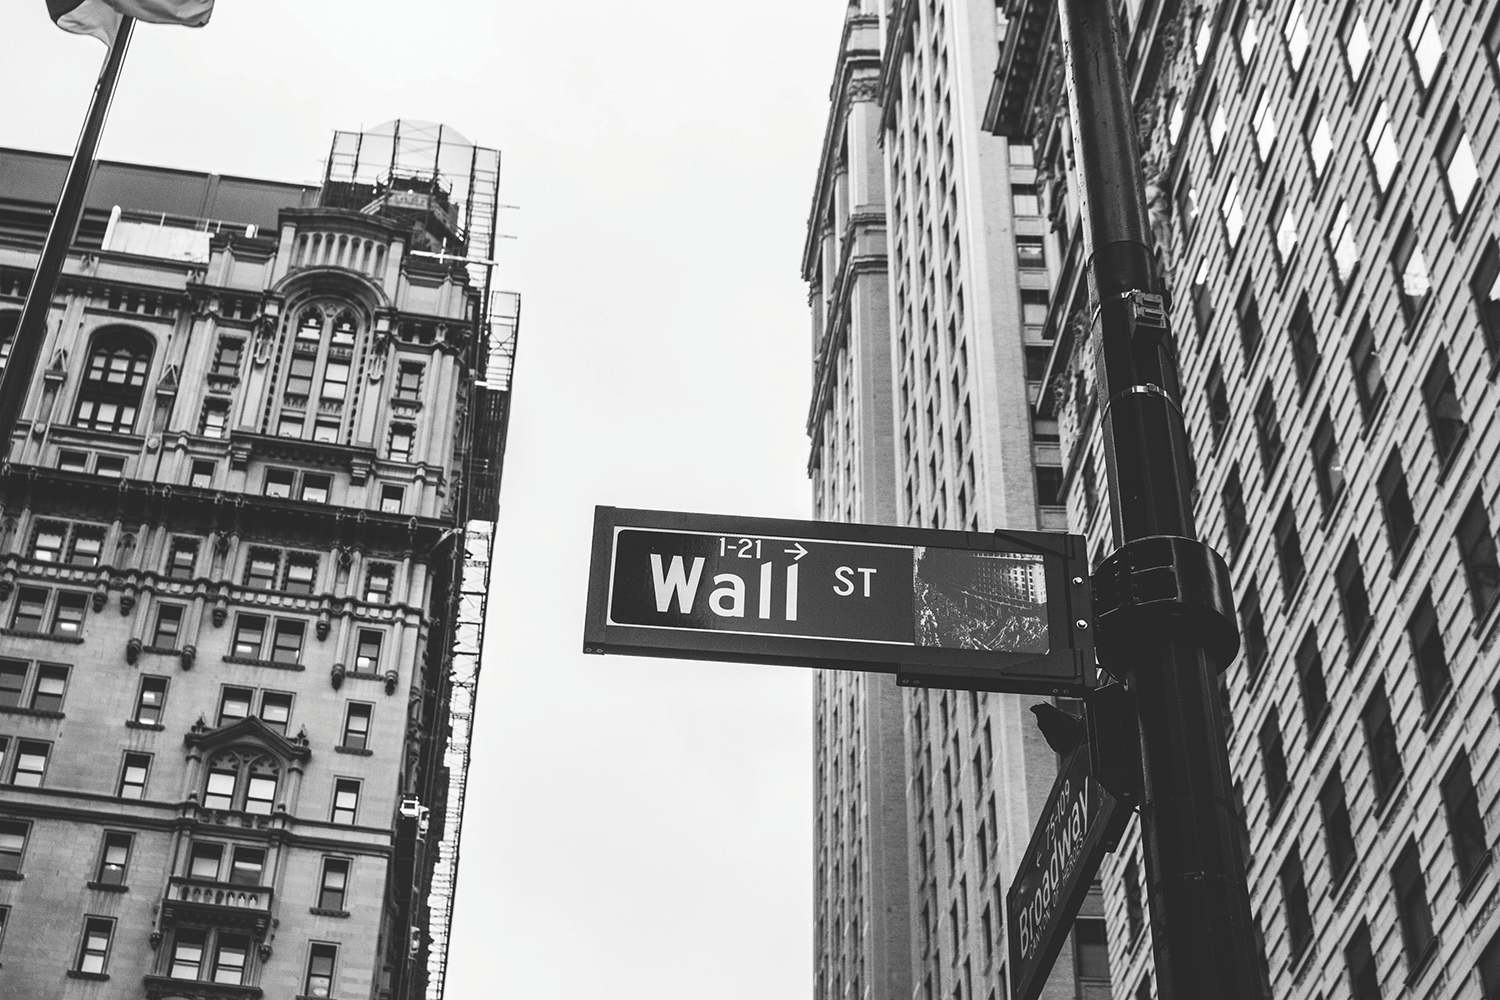 A black and white photo of the street signs at the intersection of Wall St. and Broadway in New York City